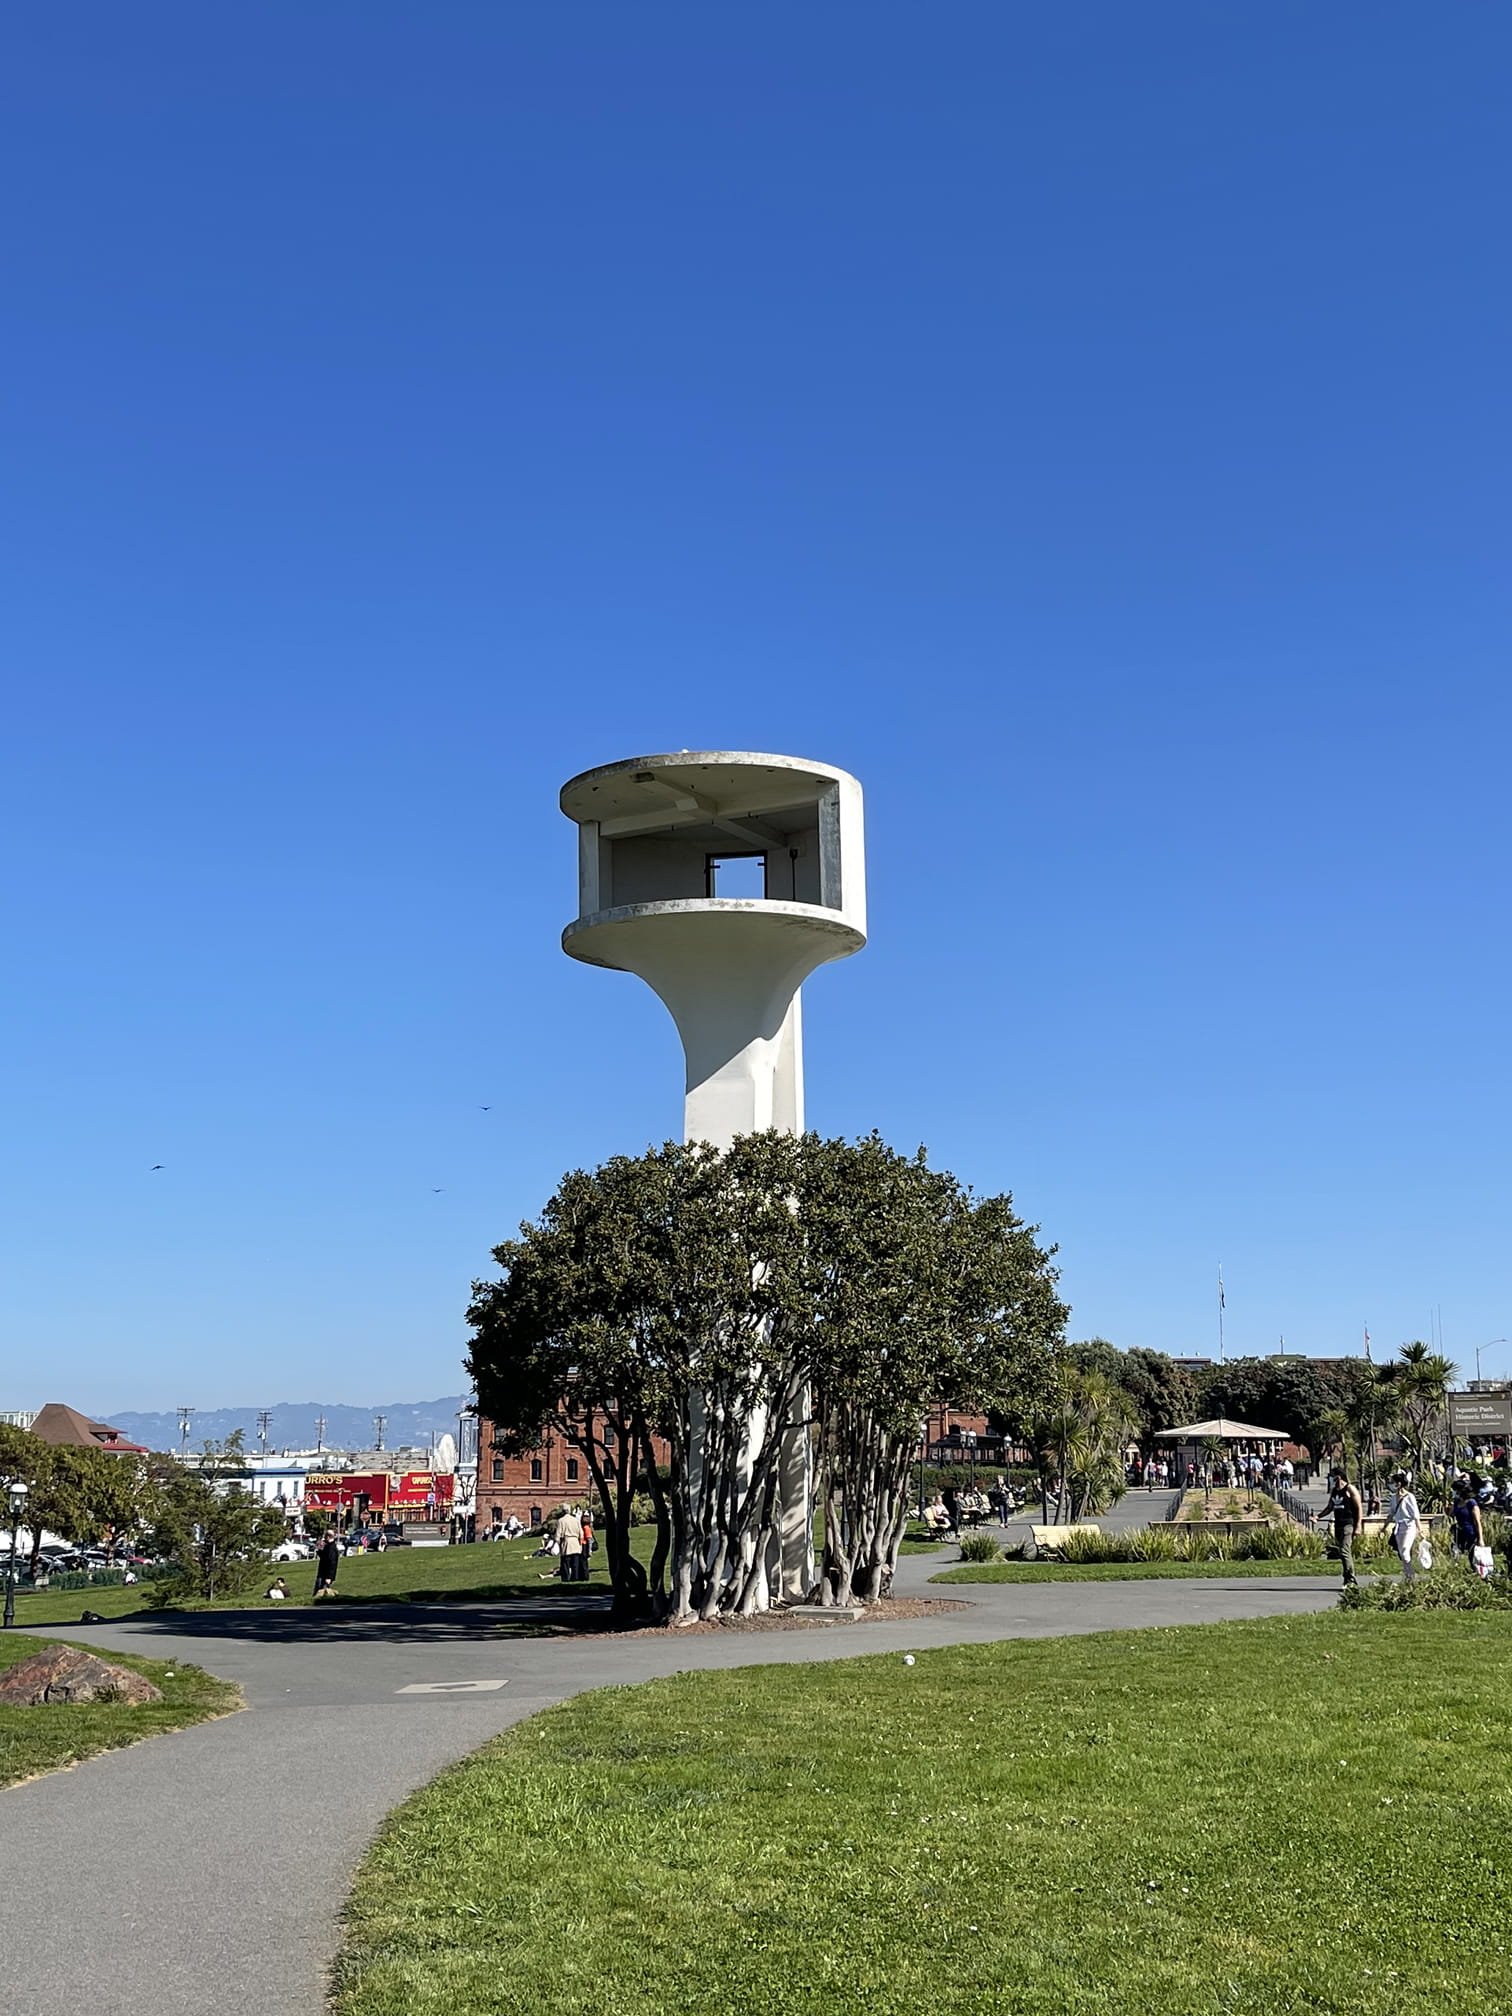 Weird vertical room lookout building thing